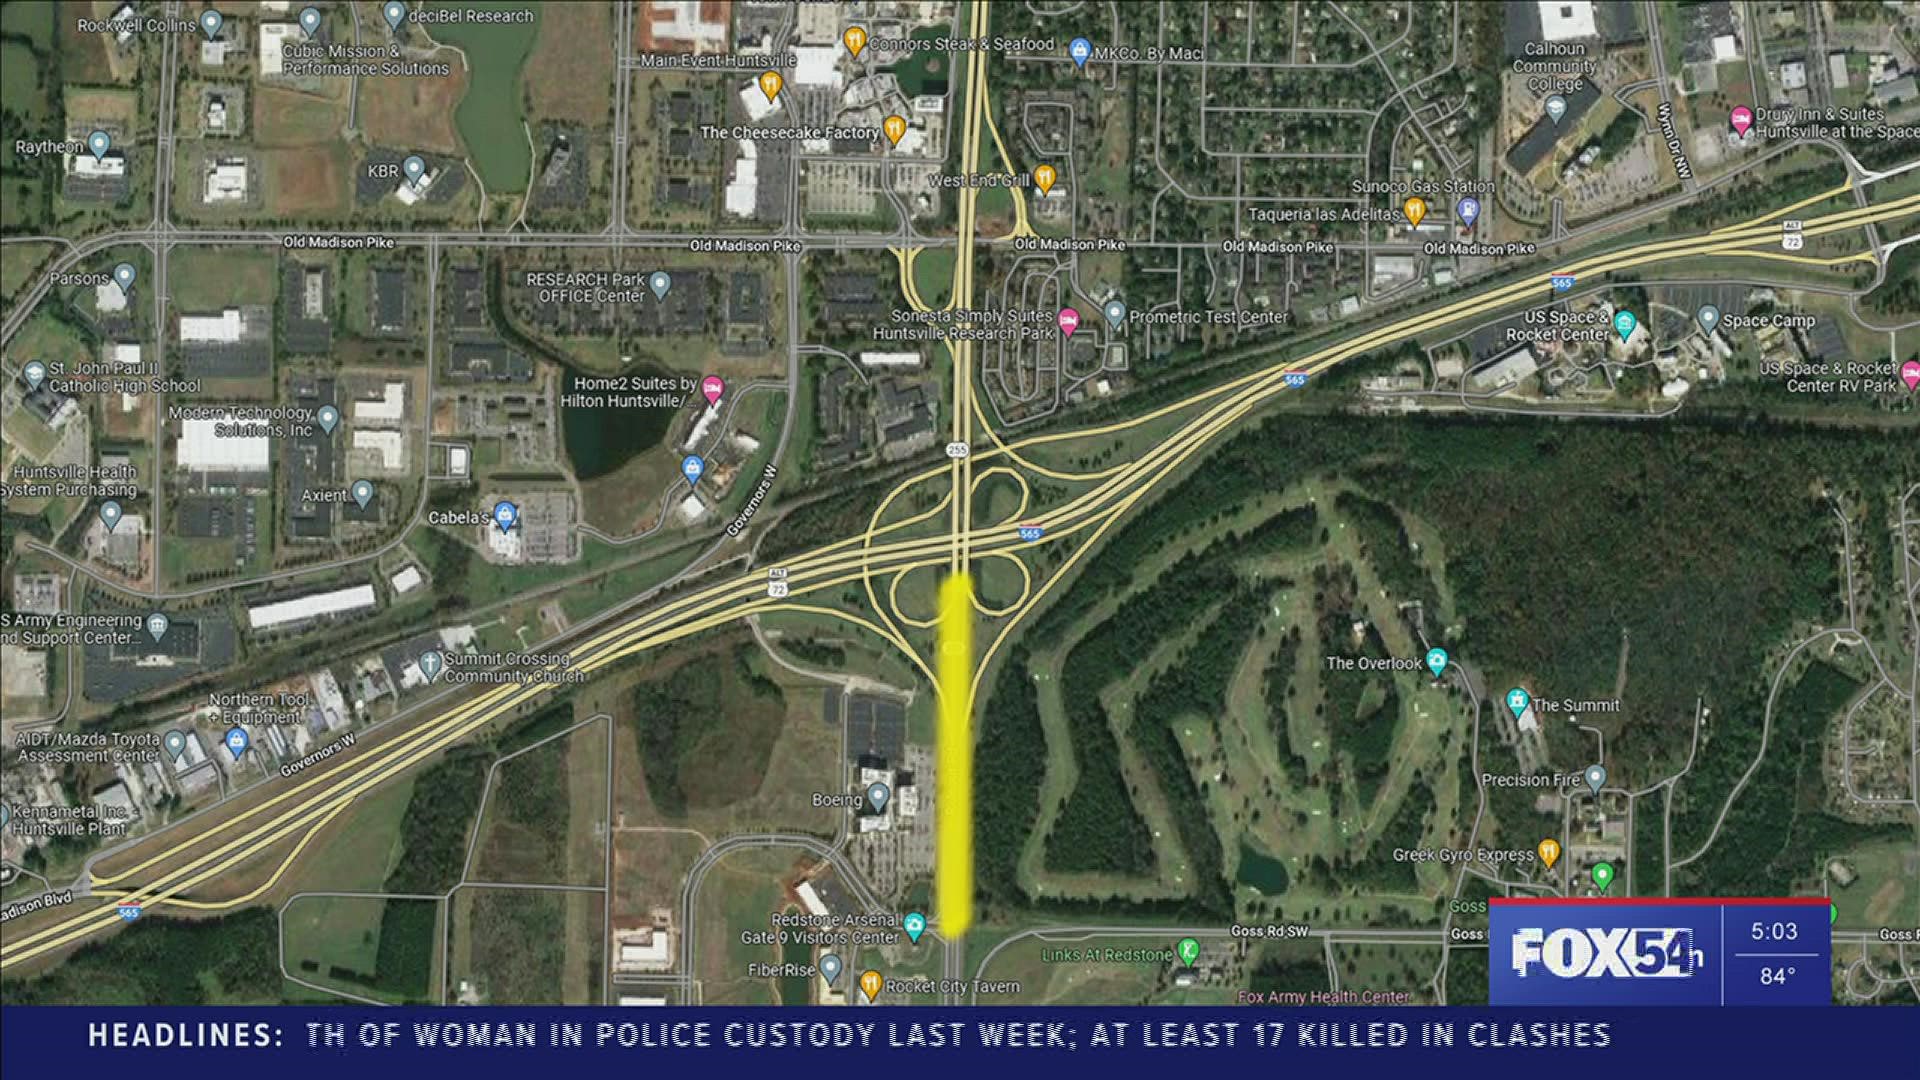 Lane closures for I-565 are expected to start tonight at 7pm